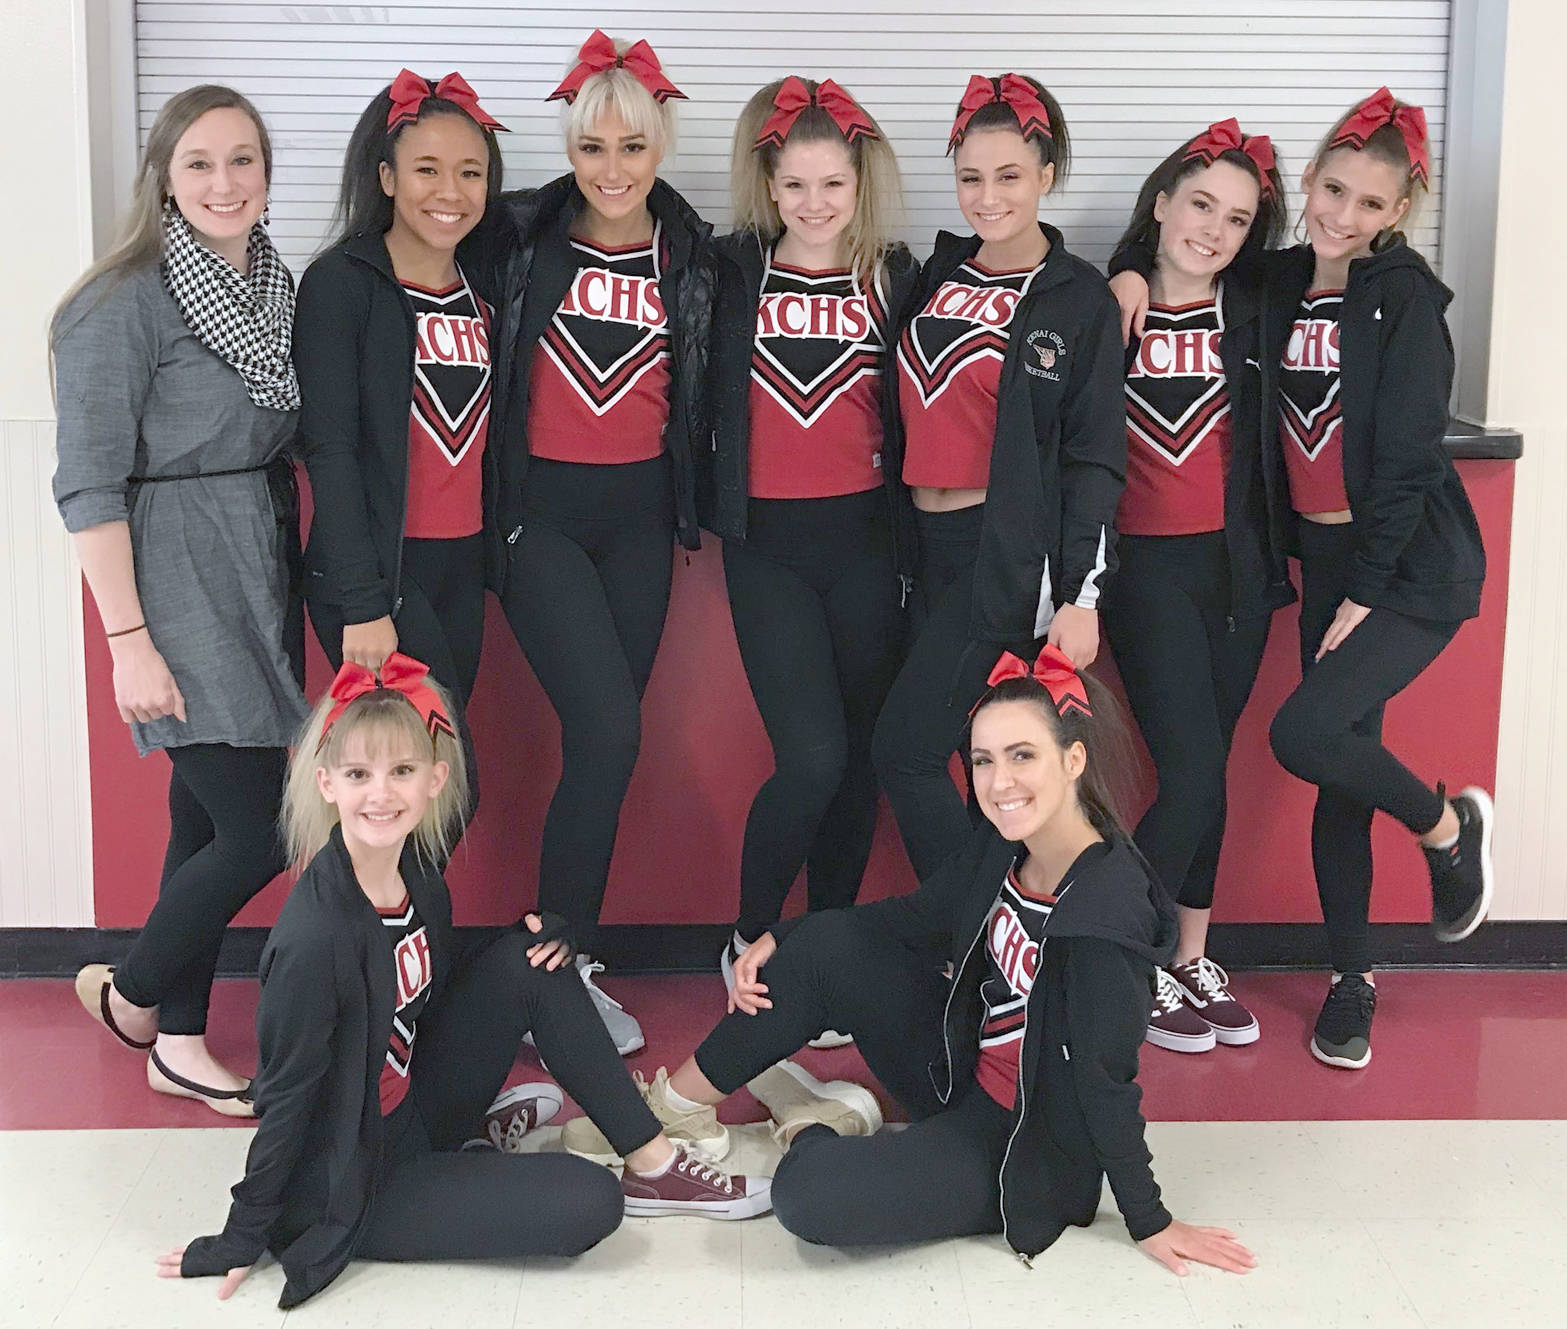 The Kenai Central cheerleaders won the small-squad state title this week in Anchorage. In the back row are coach Brianna Force, Tekaiya Rich, Rylie Fields, Tavia Wilson, Vivian Ceresoli, Arielle Hamar and Karley Harden. In the front row are Valerie Brophy and Zoe Pascal. (Photo courtesy of Misty Hamilton)